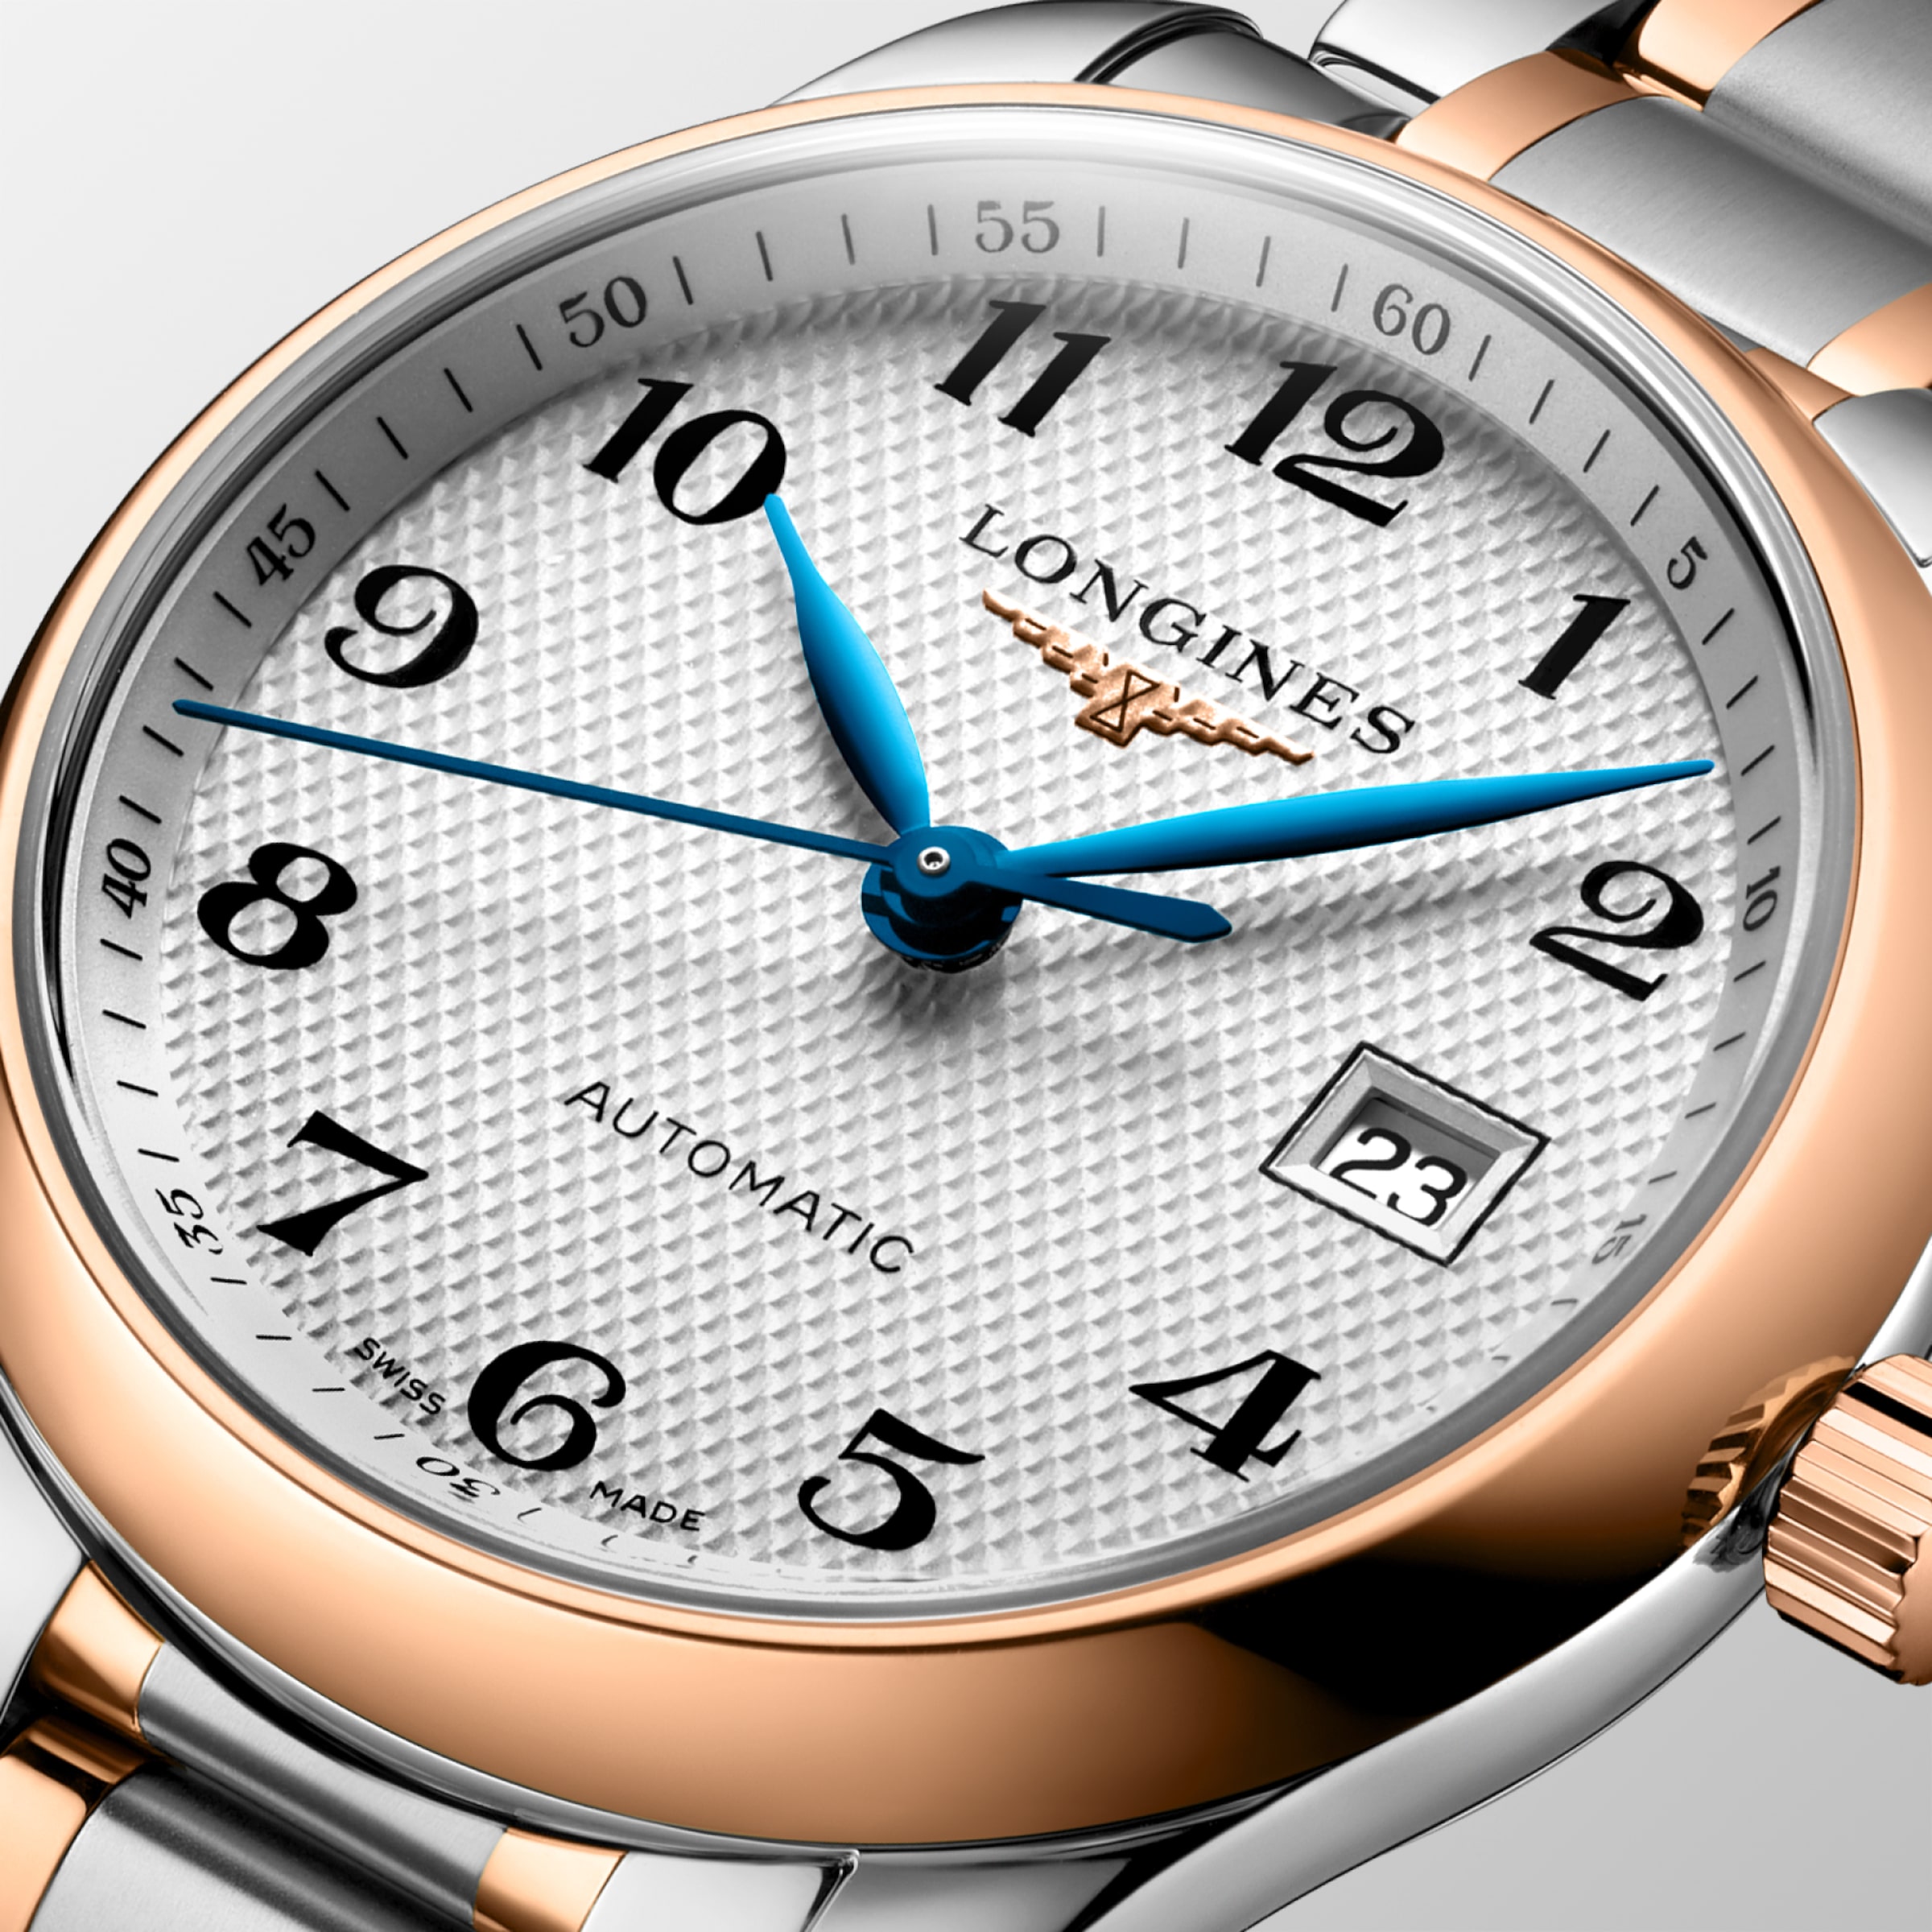 Longines MASTER COLLECTION Automatic Stainless steel and 18 karat pink gold cap 200 Watch - L2.257.5.79.7